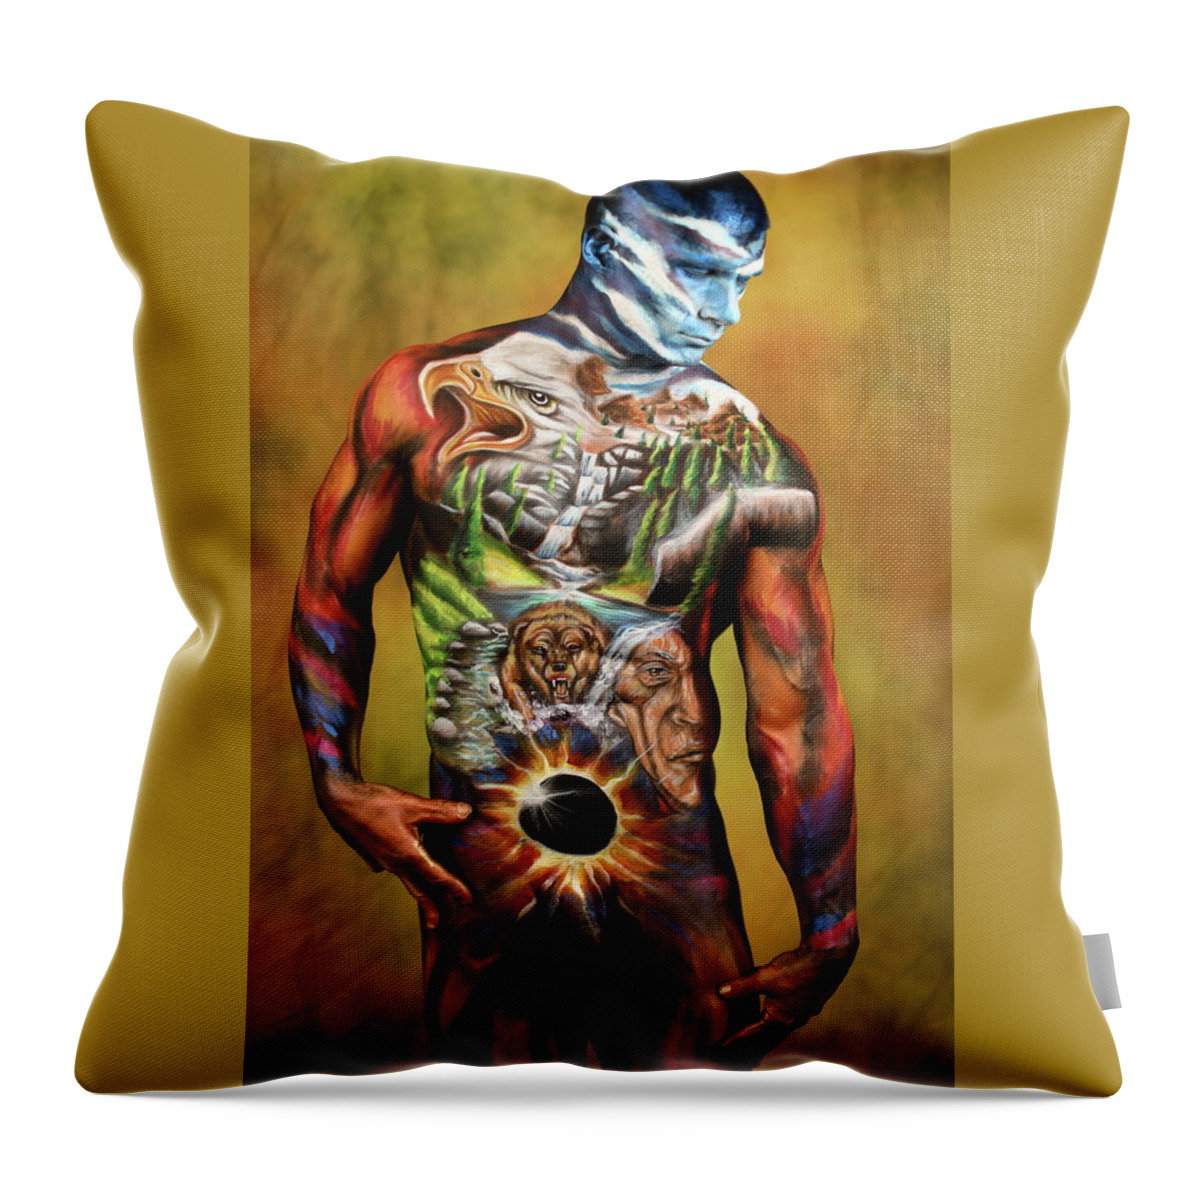 Bodypaint Throw Pillow featuring the photograph A Warriors Cause by Angela Rene Roberts and Cully Firmin